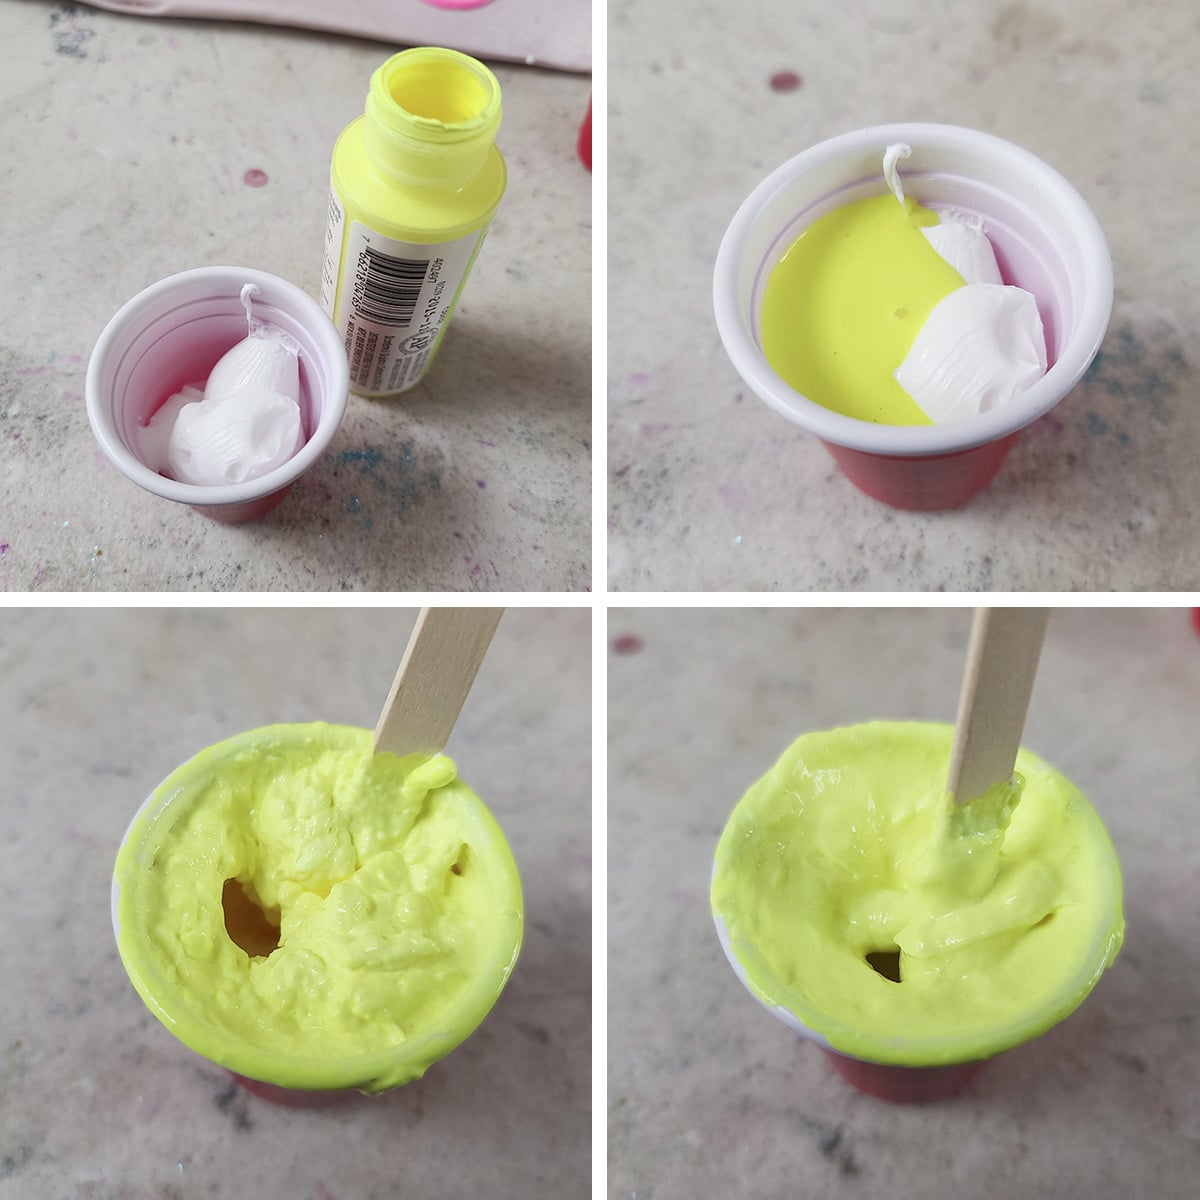 A 4 part compilation image showing neon yellow acrylic paint being mixed into white caulking.